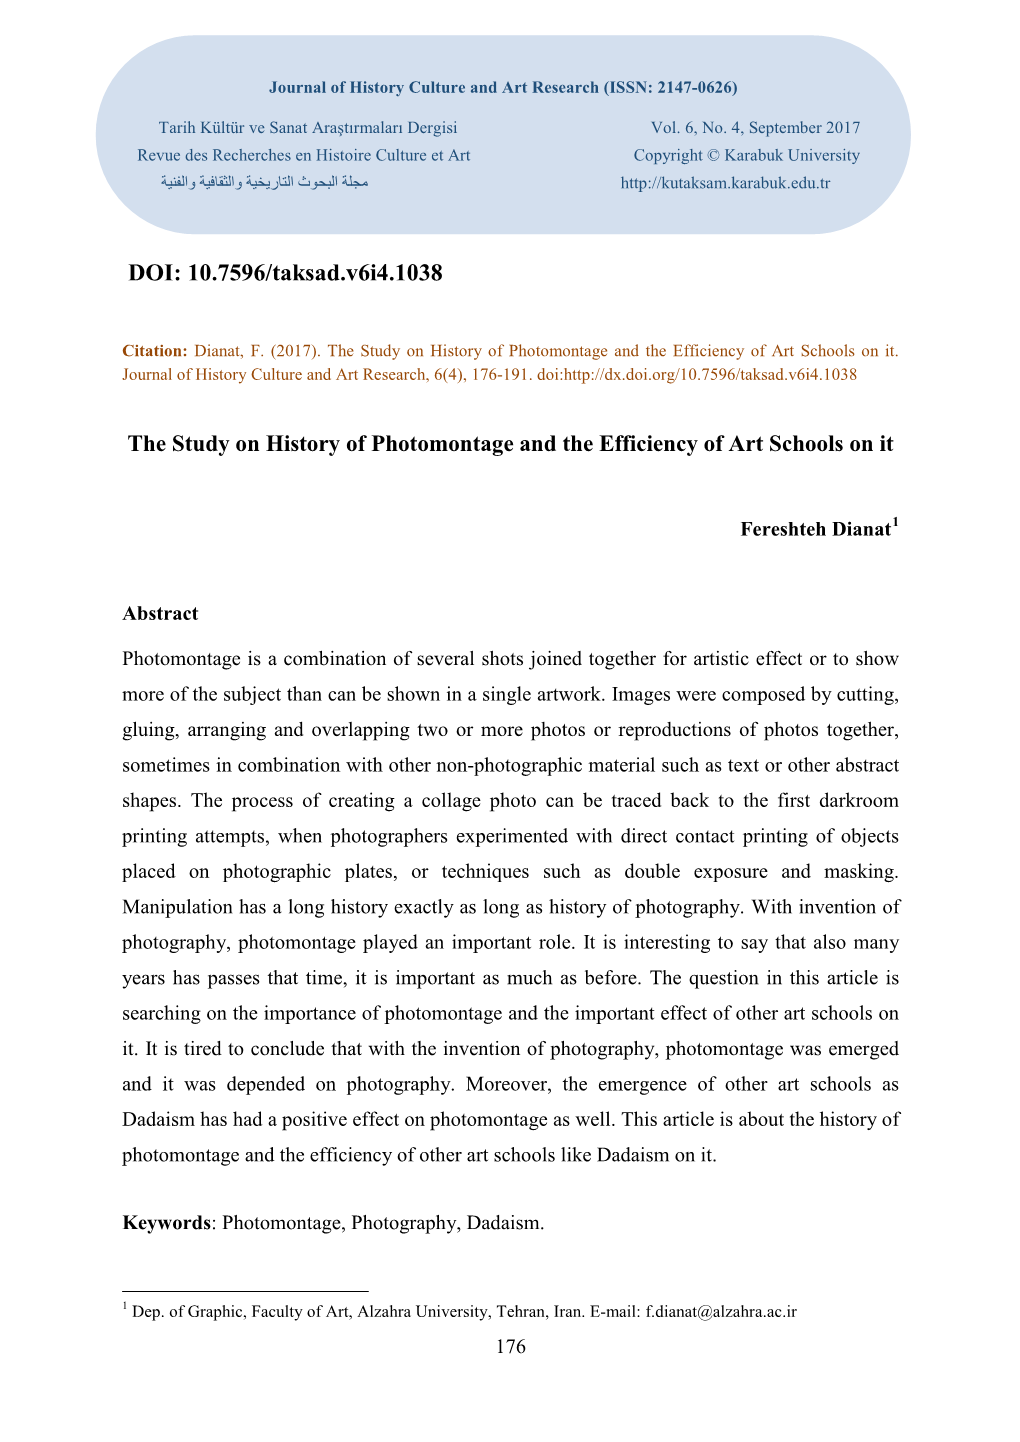 The Study on History of Photomontage and the Efficiency of Art Schools on It